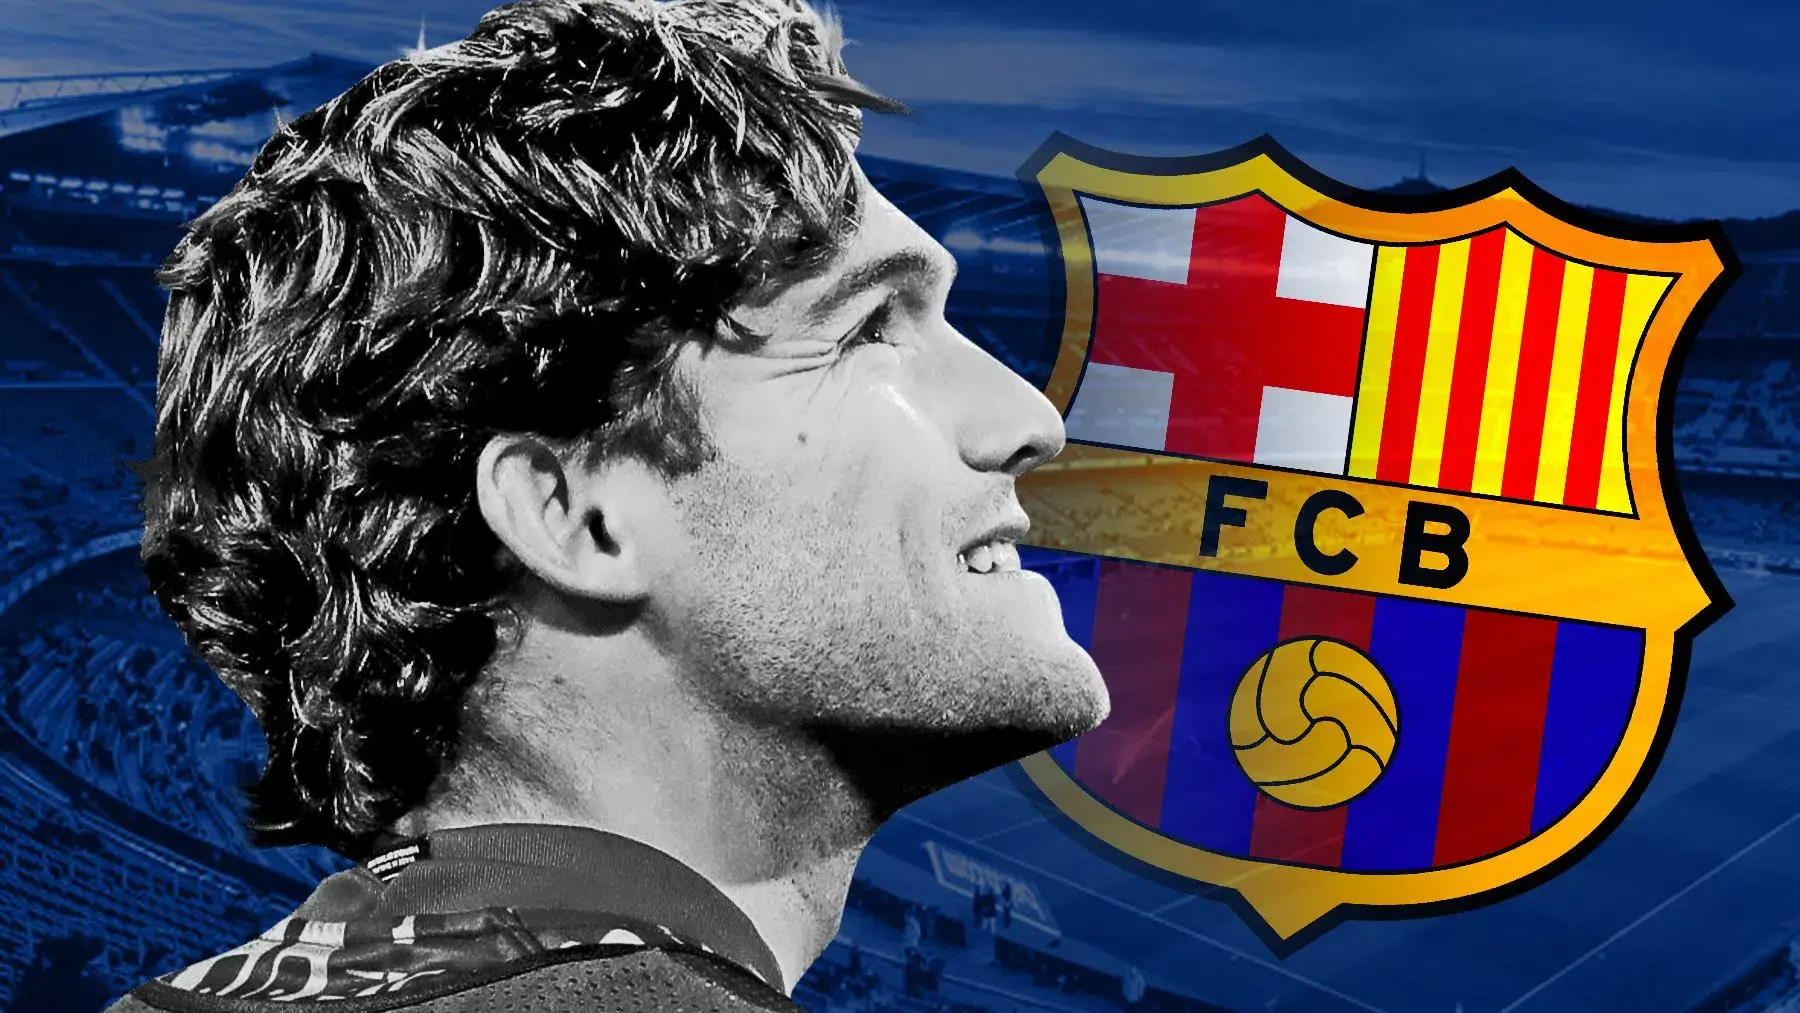 Marcos Alonso offered Betis: Barcelona want him out
	

